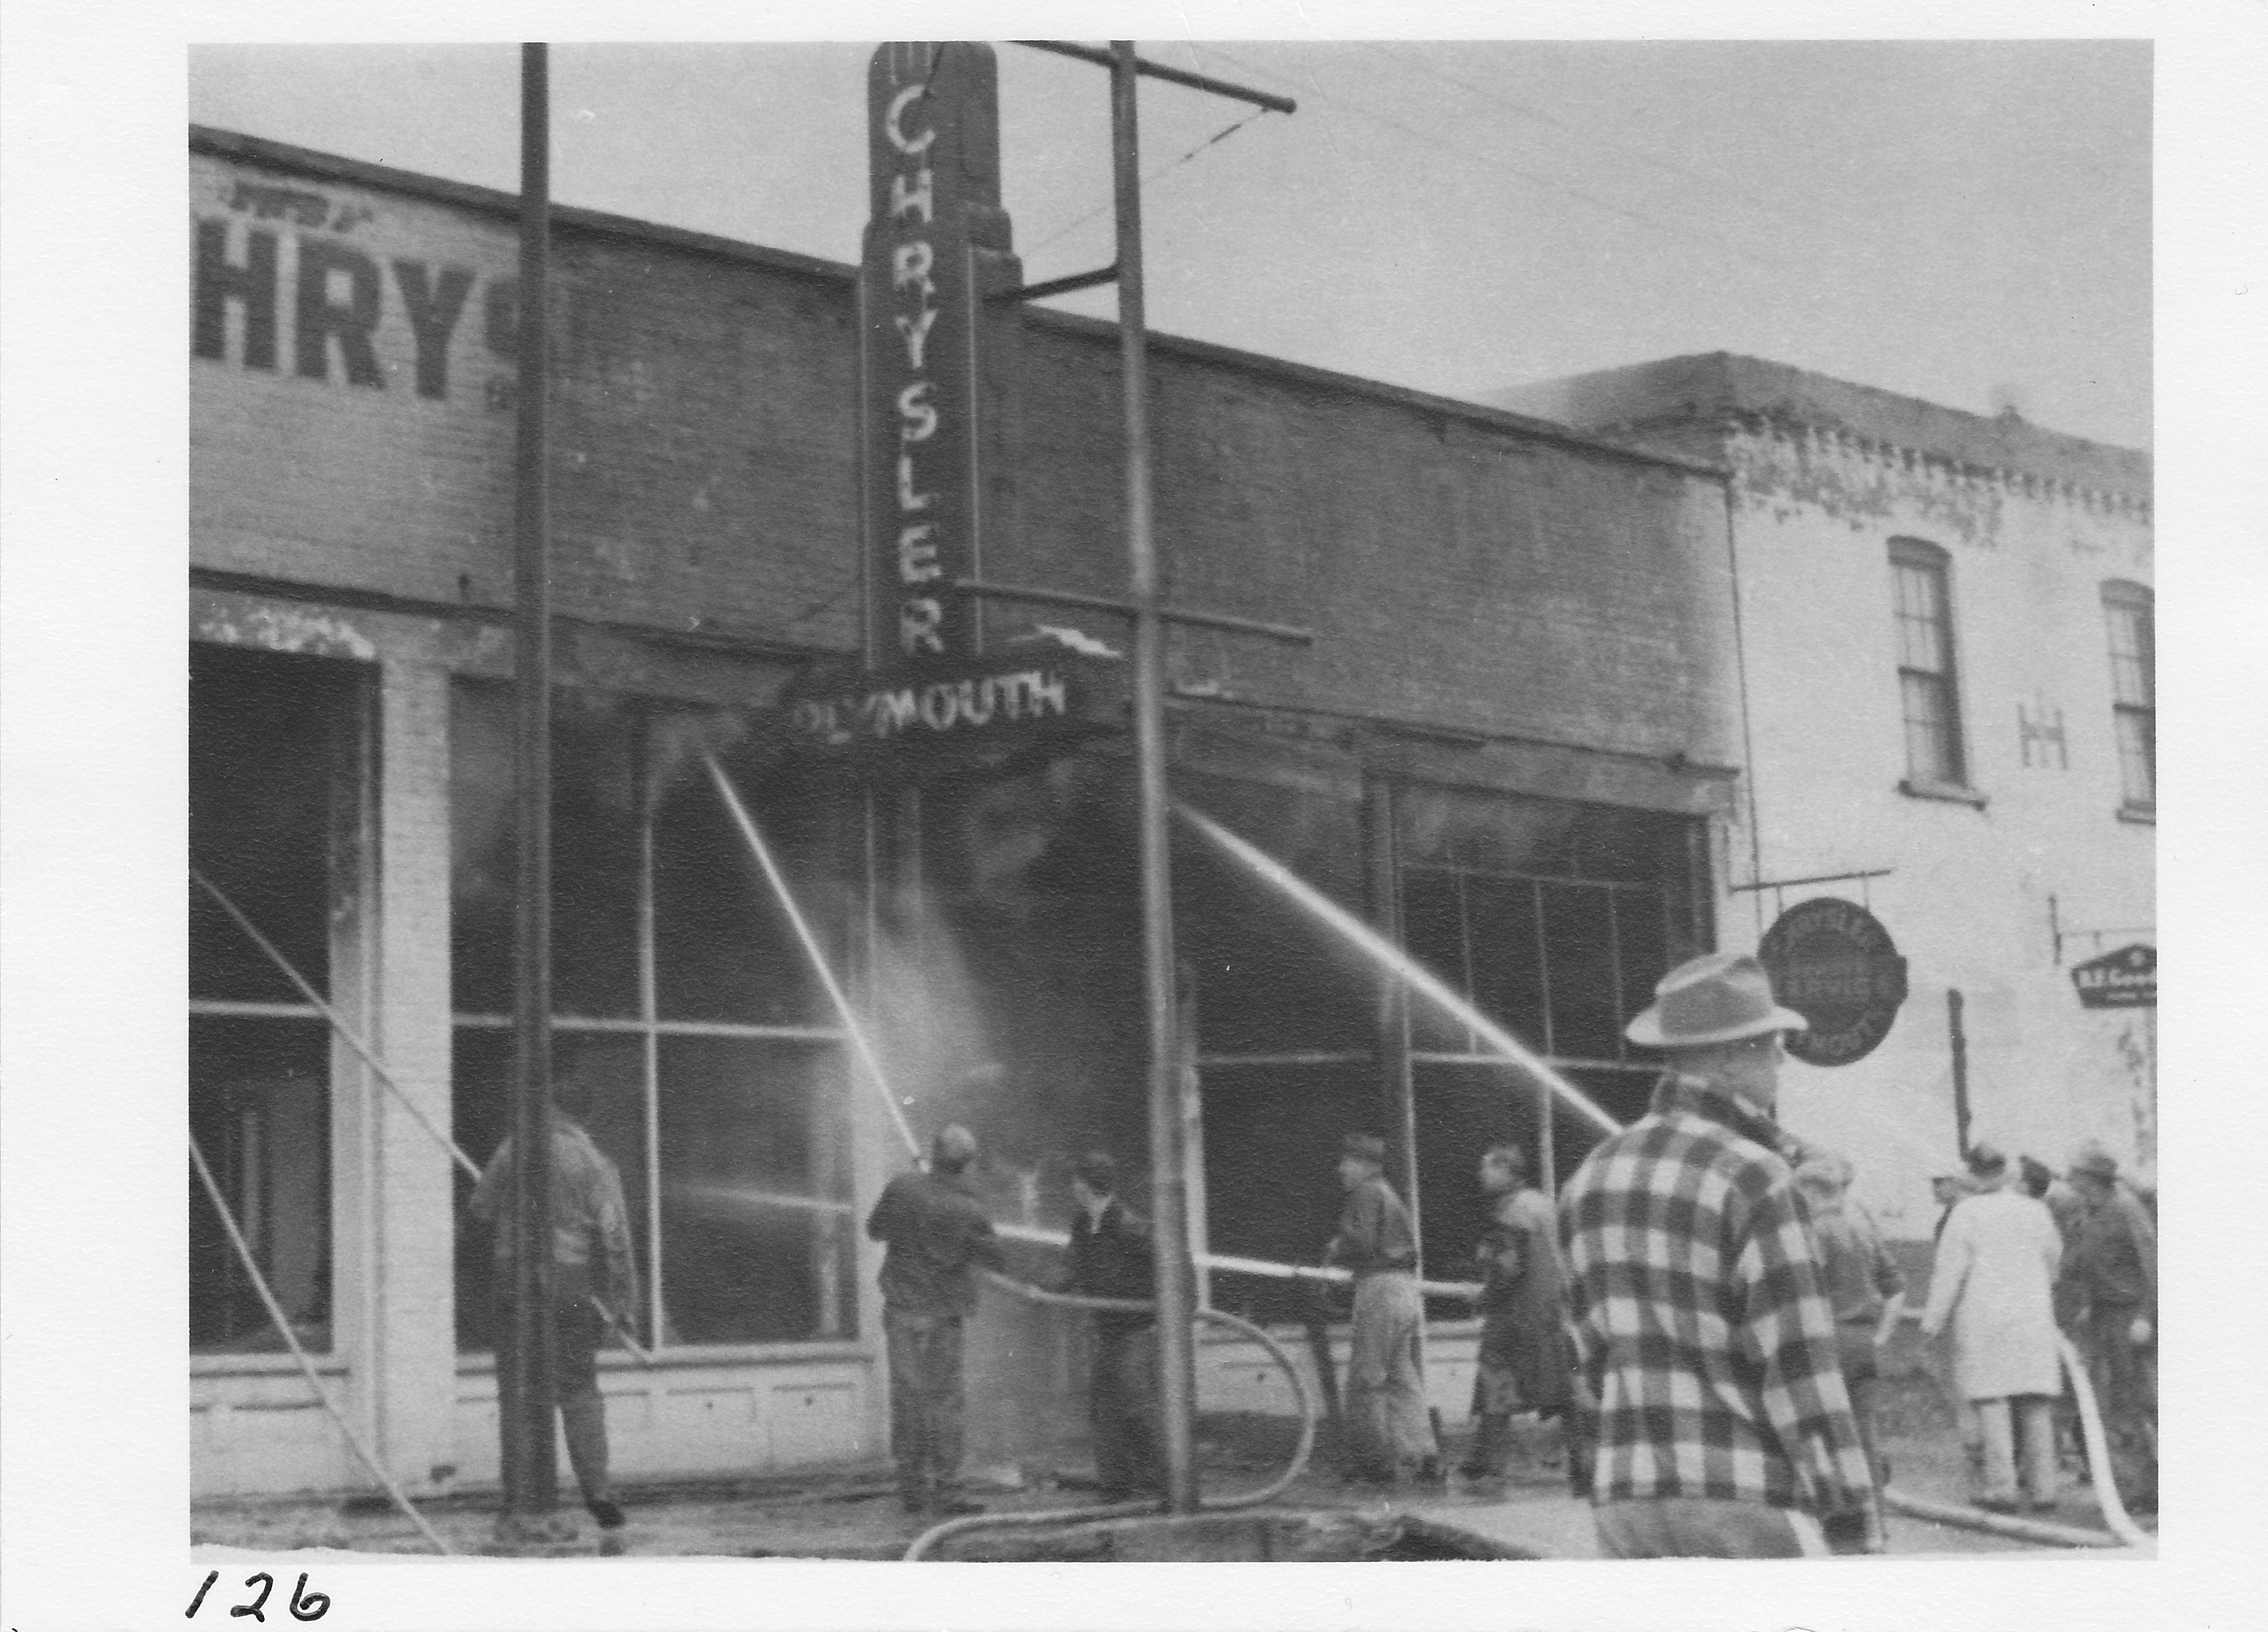 Fire at Tidwell’s Auto Sales and garage on West Main St. April 1952.